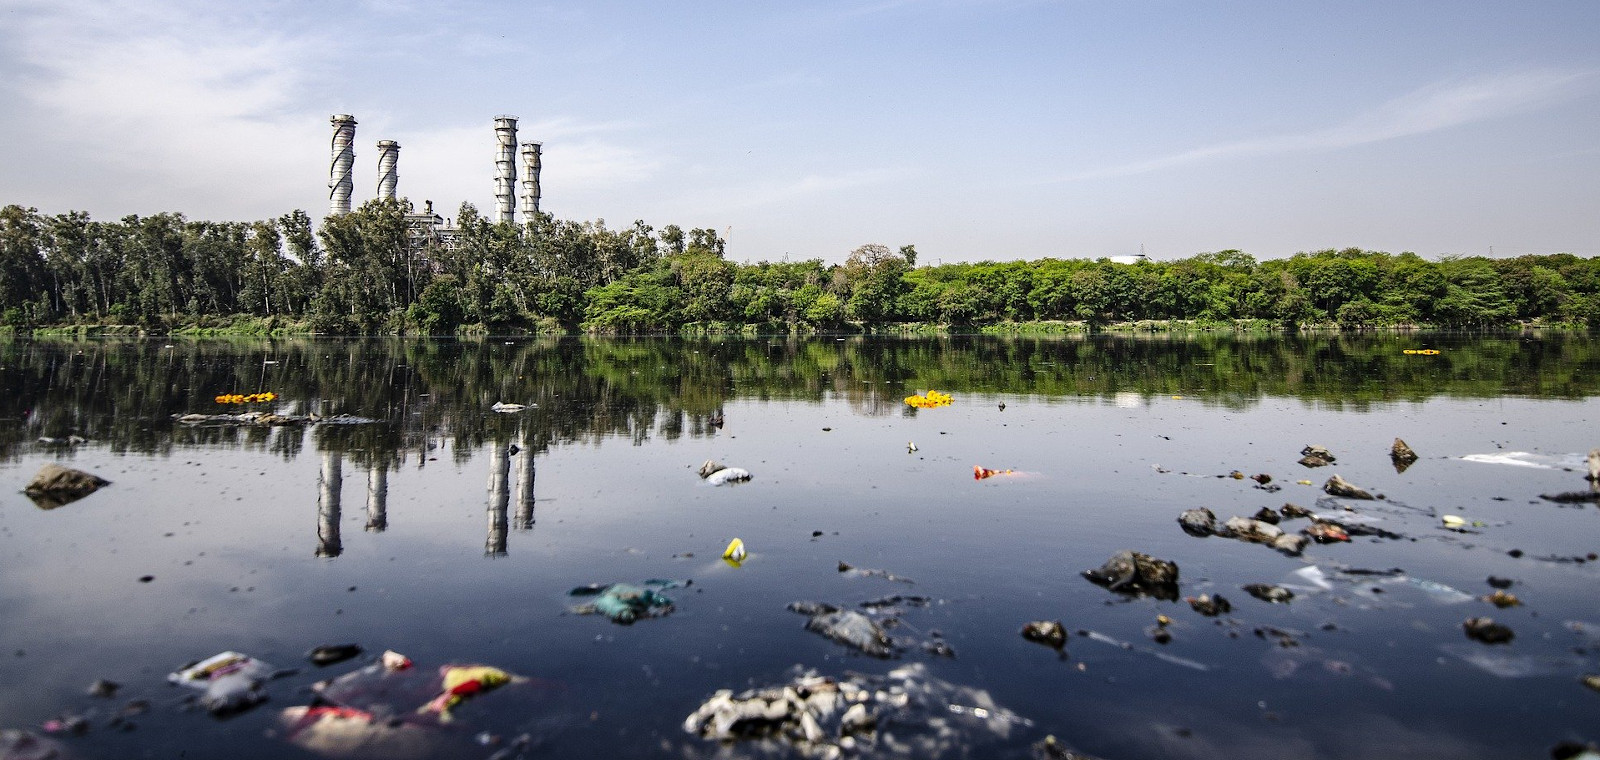 A lake polluted with plastics (Image by Yogendra Singh from Pixabay)